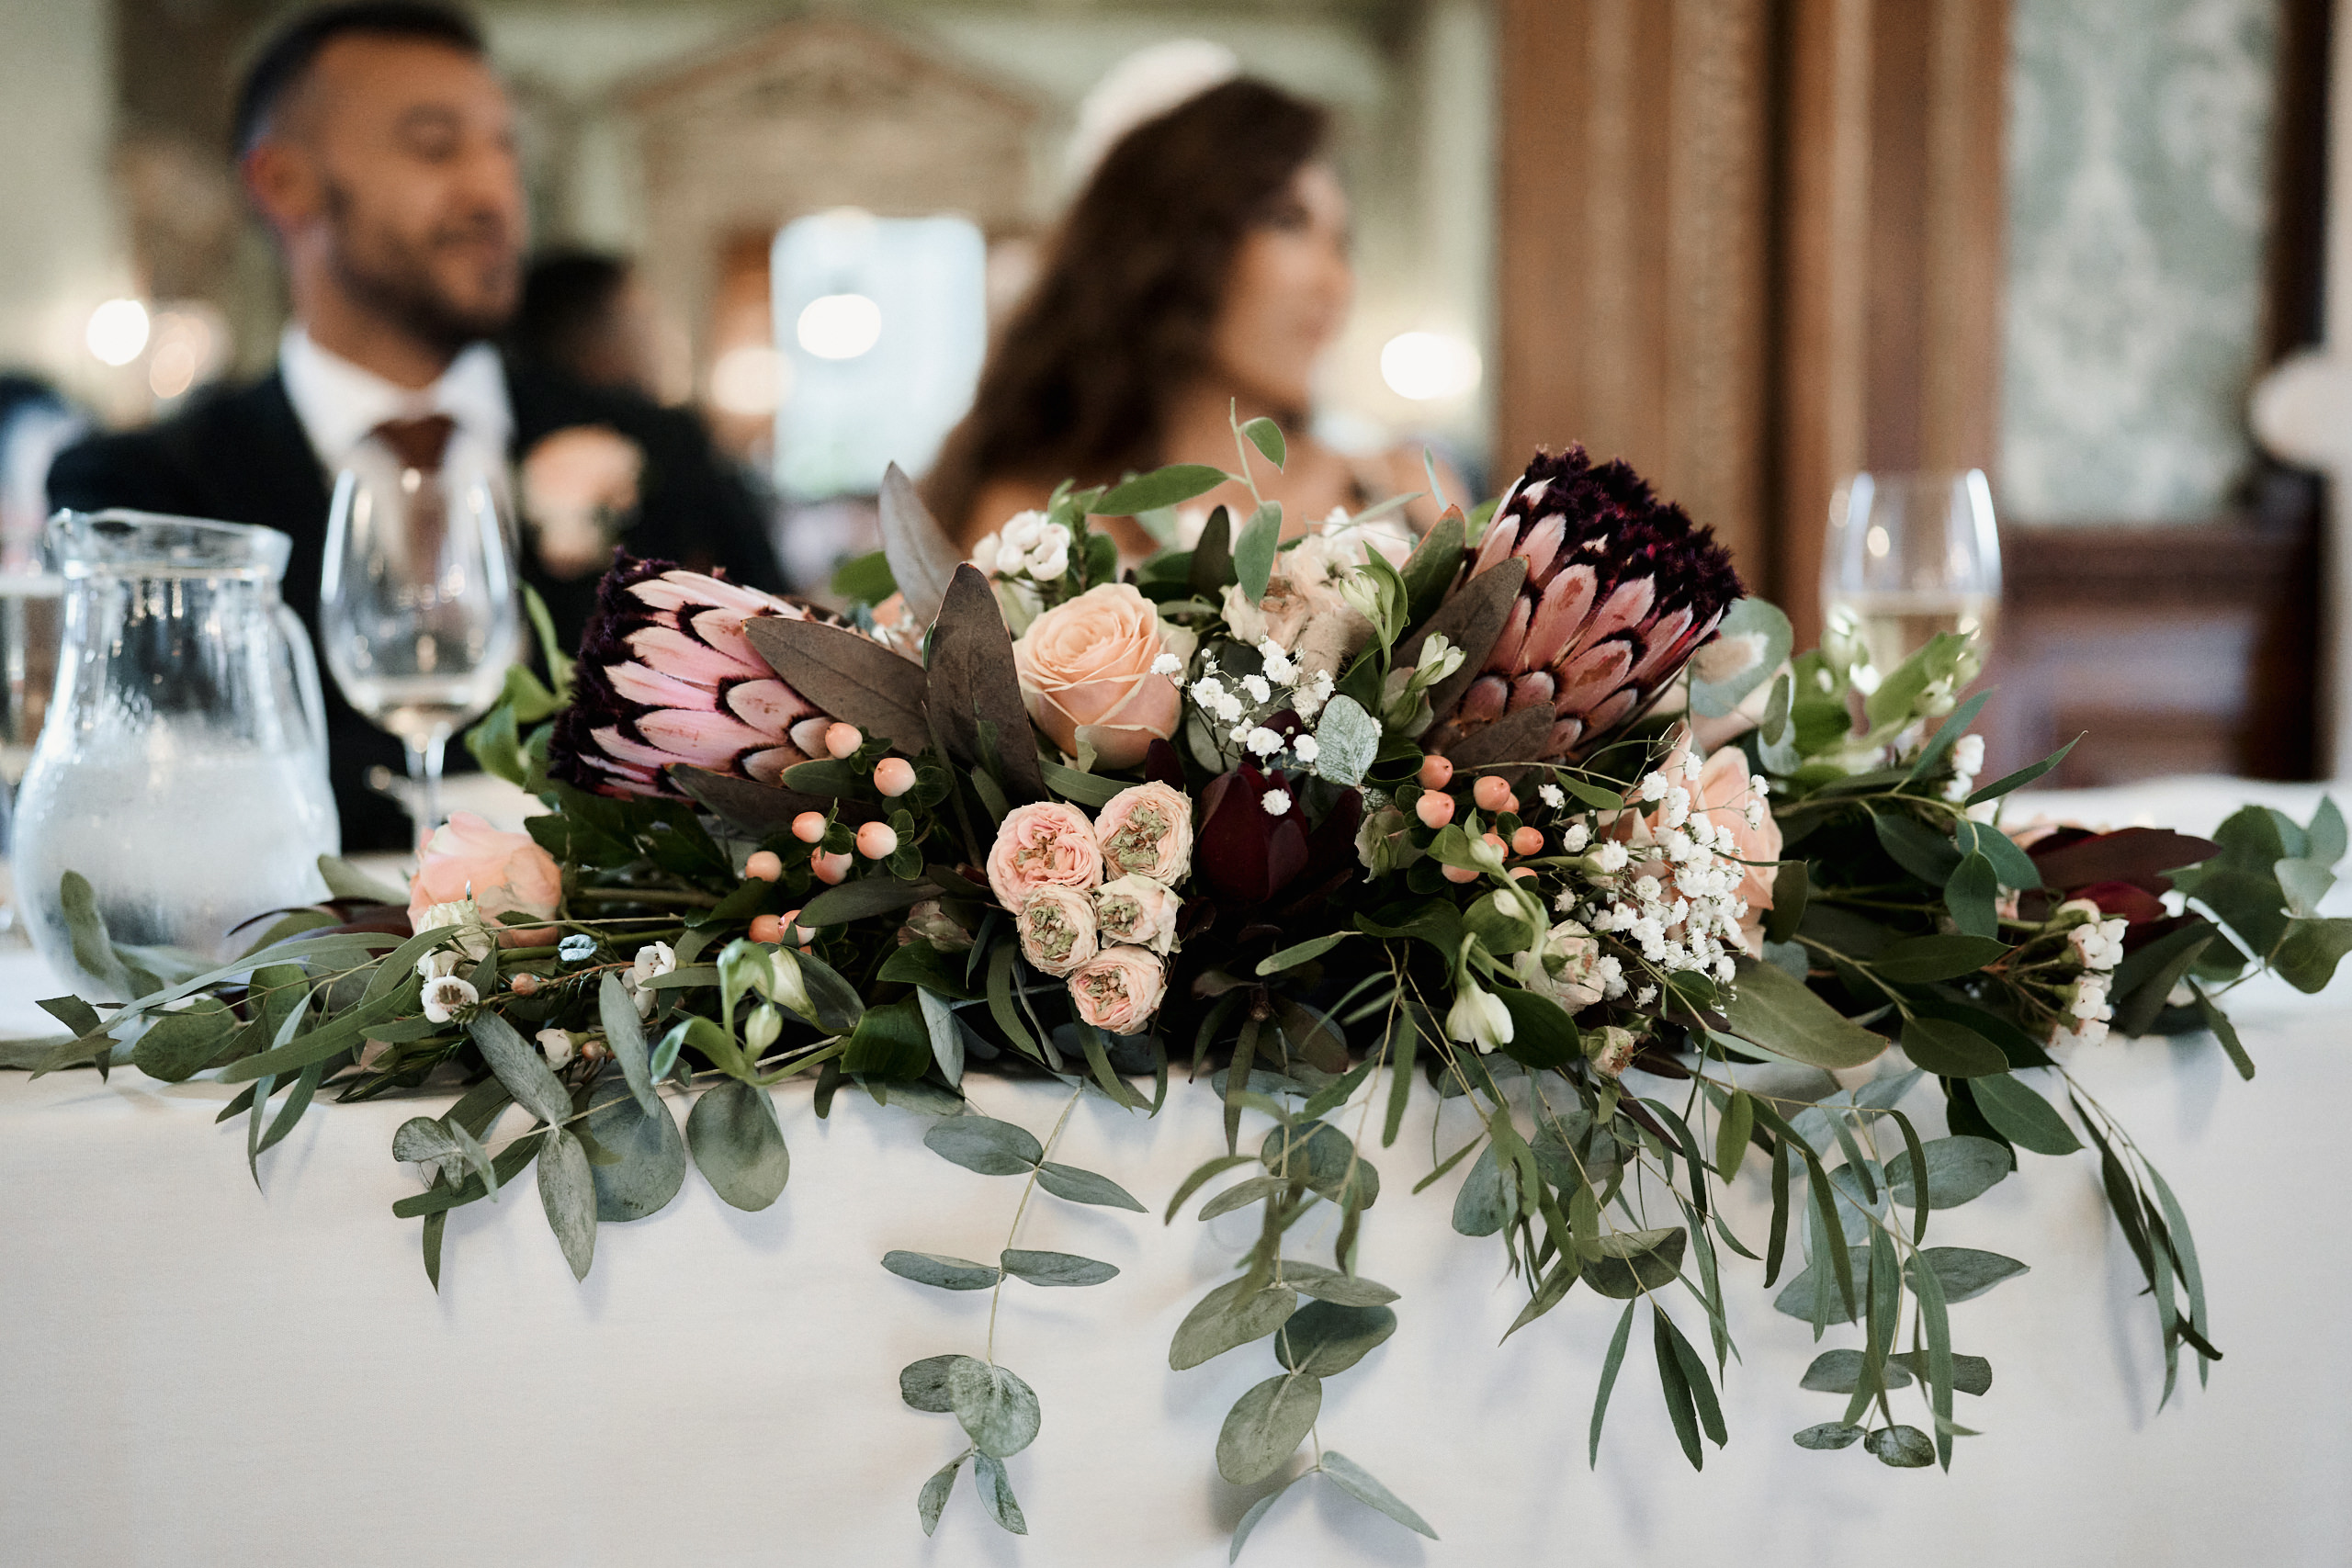 A couple getting married sitting at a table with flowers.